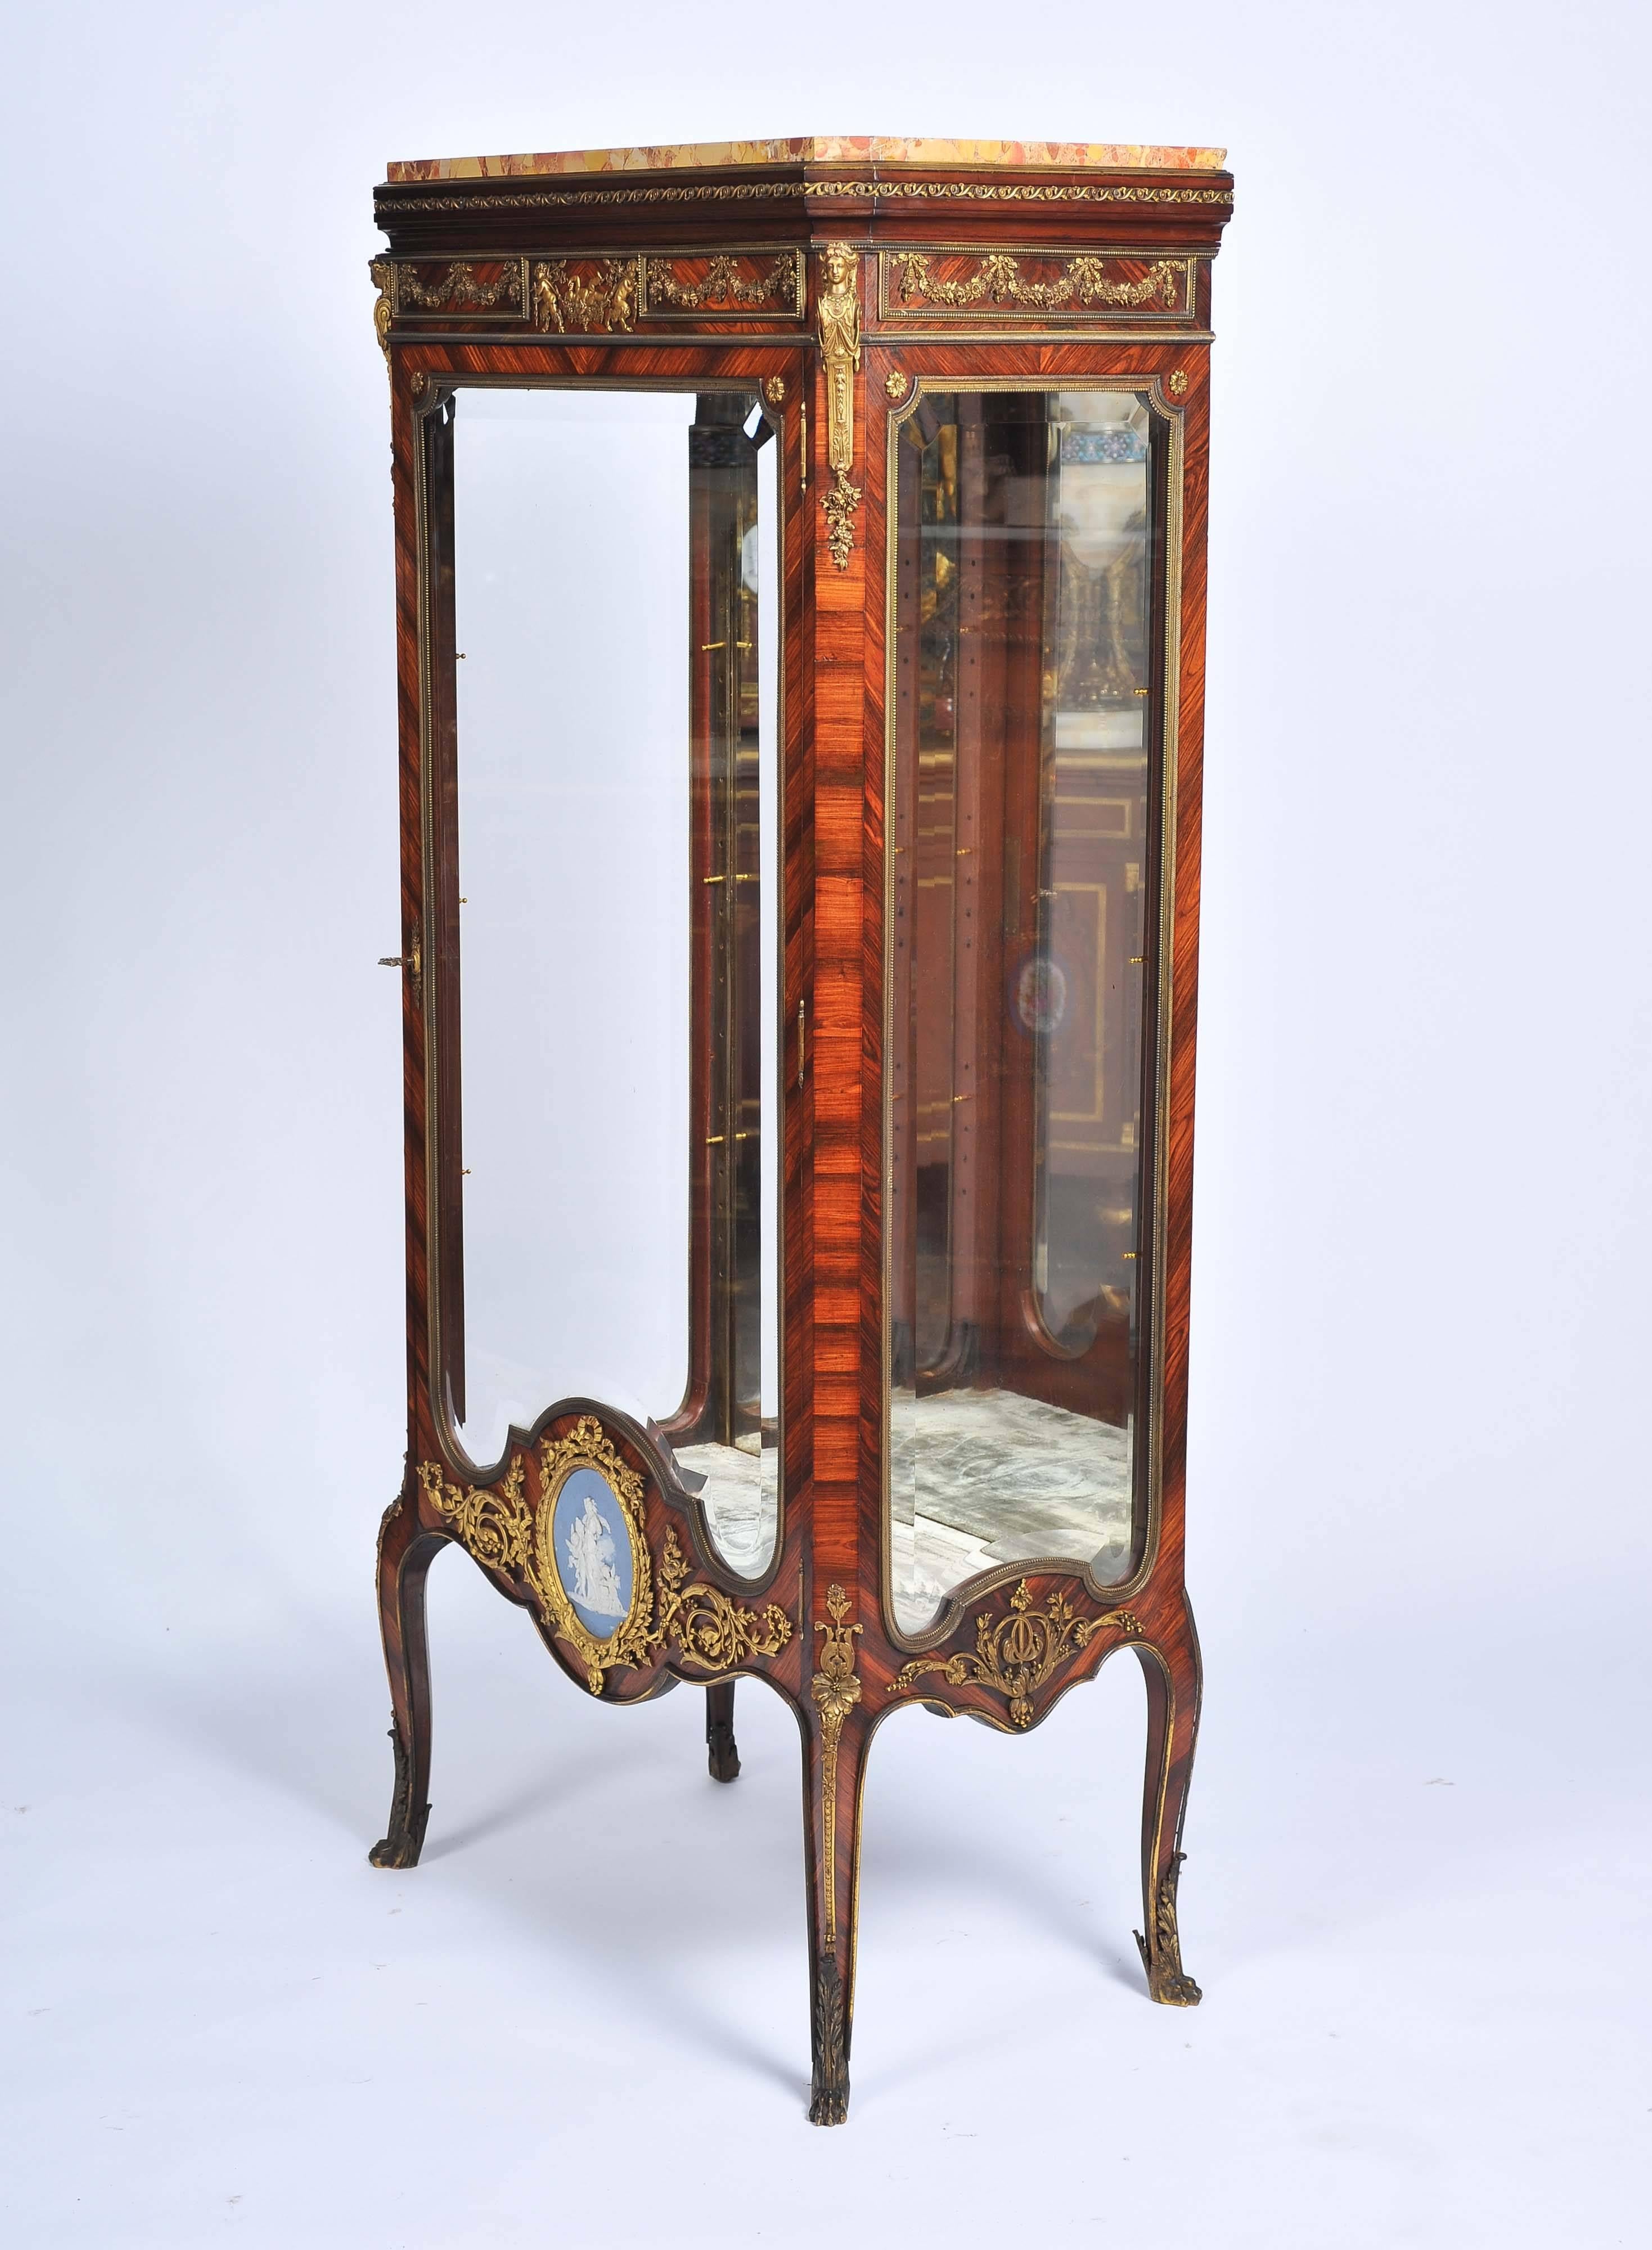 A fine quality 19th century Louis XV style kingwood vitrine, having the original marble top, classical ormolu mounts, bevelled glass, adjustable shelves. A Wedgwood plaque inset to the base of the door and raised on delicate ormolu-mounted cabriole